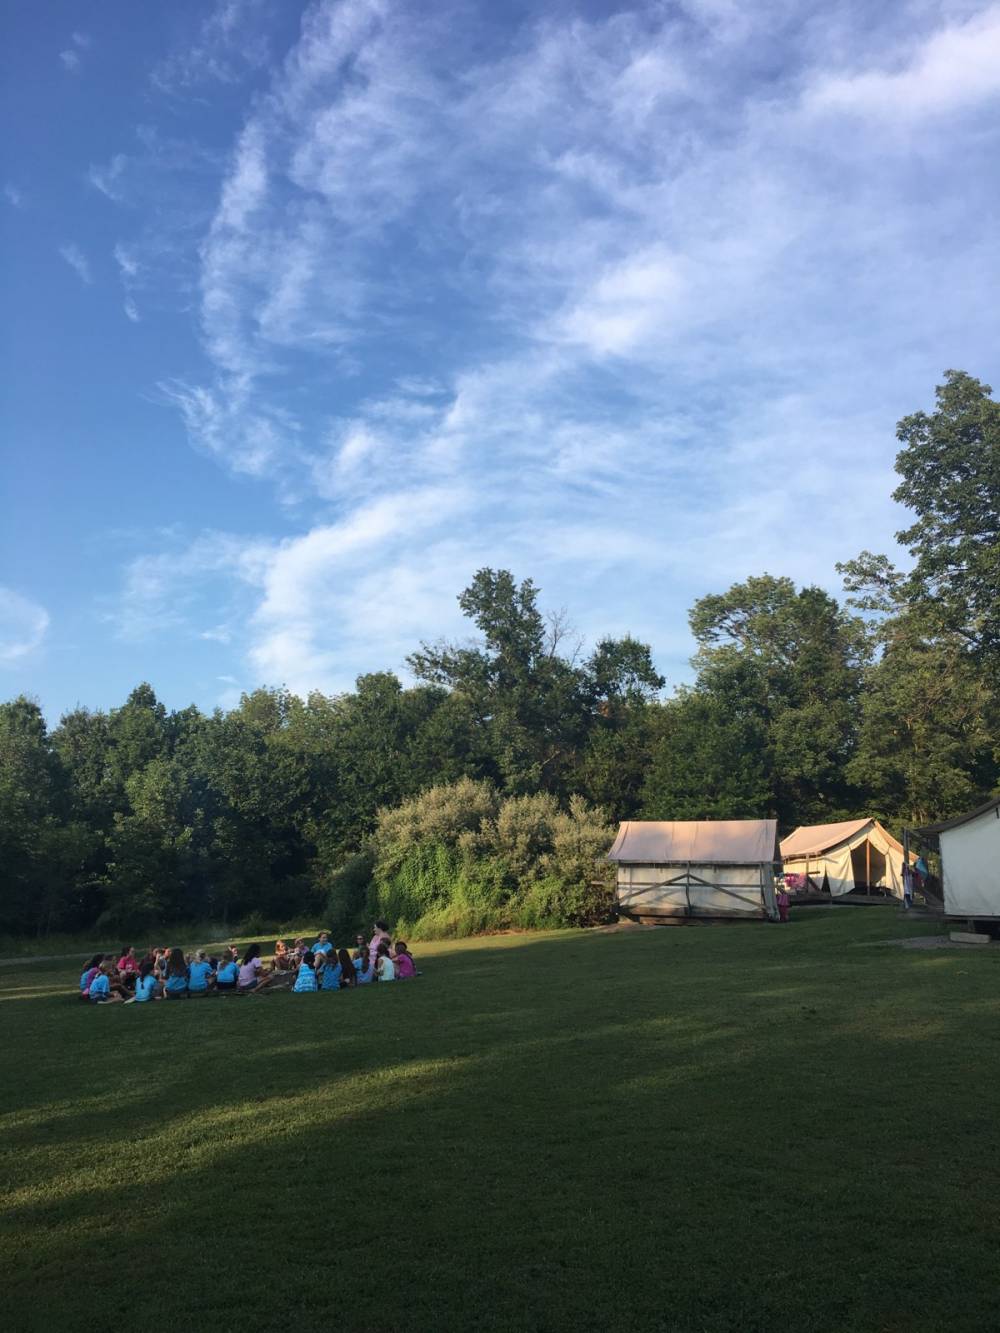 TOP NEW JERSEY SCIENCE CAMP: Camp Agnes DeWitt is a Top Science Summer Camp located in Hillsborough New Jersey offering many fun and enriching Science and other camp programs. Camp Agnes DeWitt also offers CIT/LIT and/or Teen Leadership Opportunities, too.